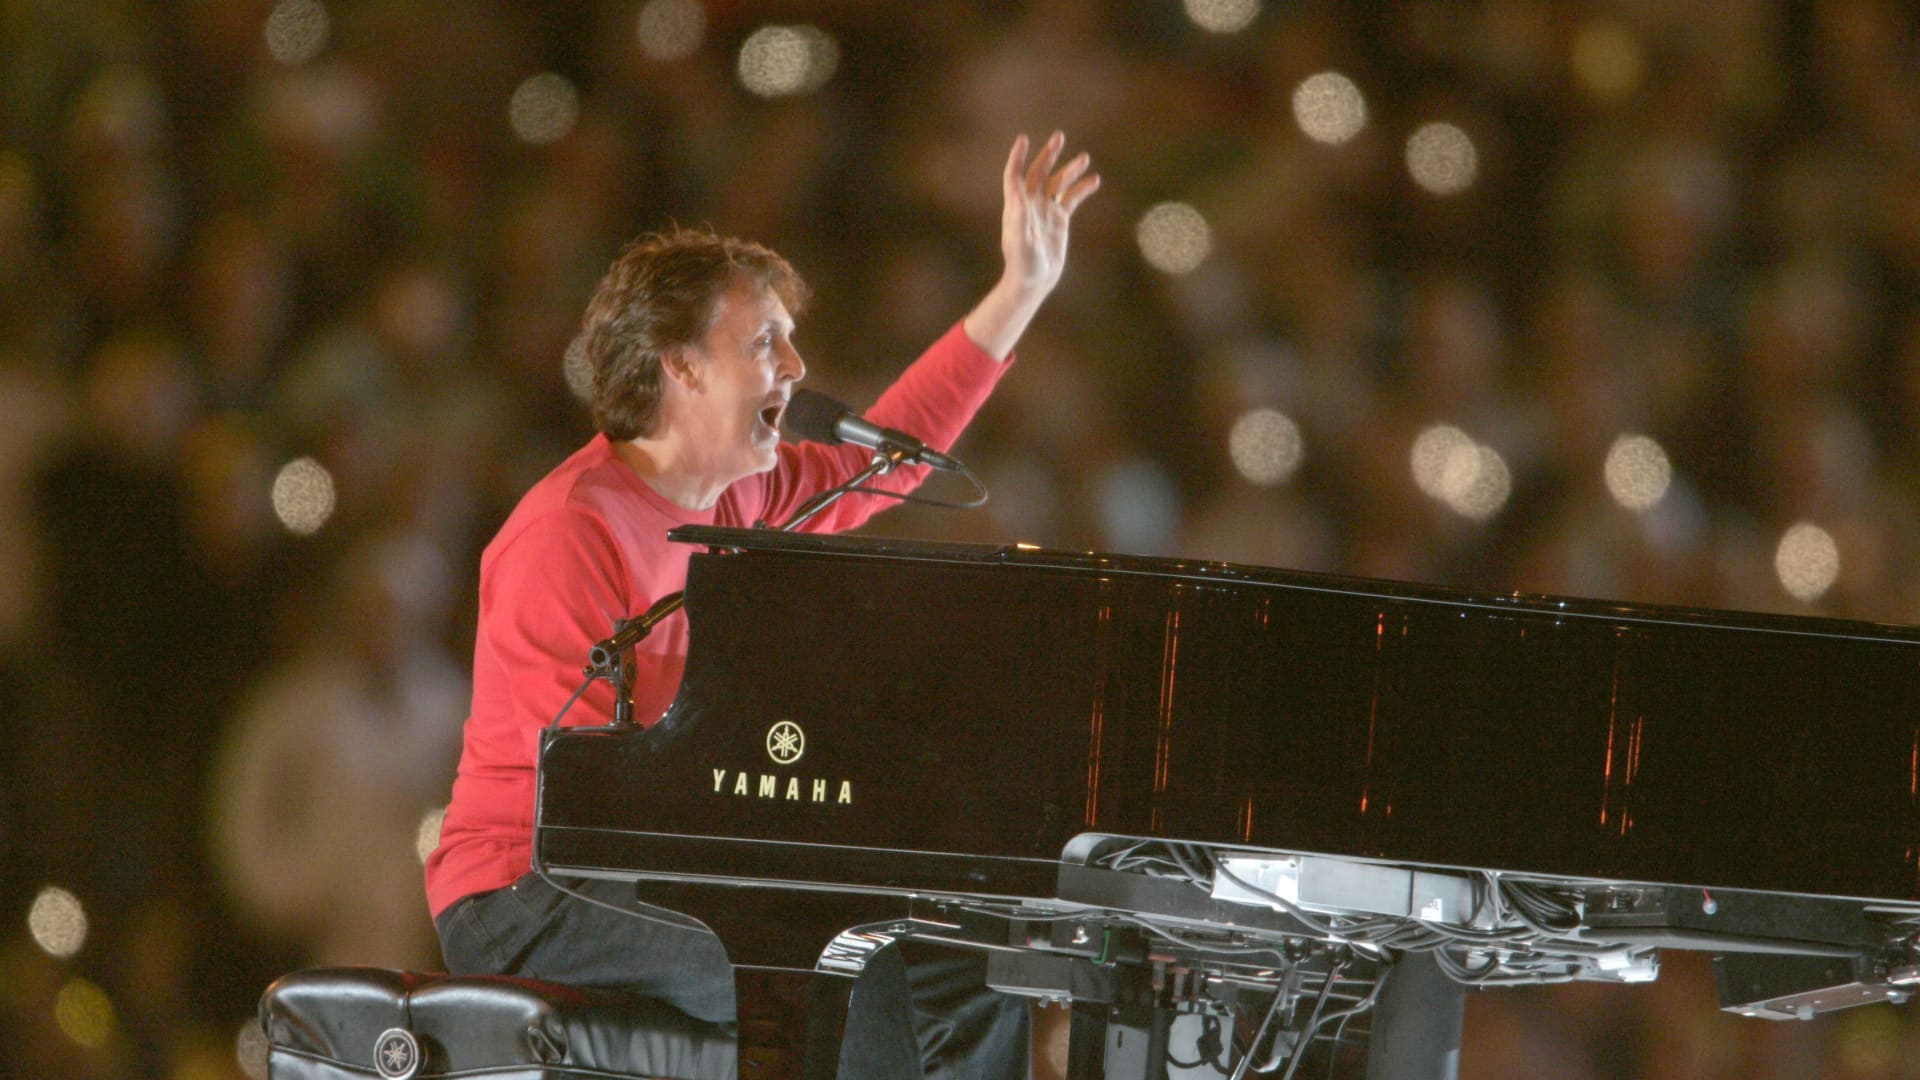 Paul McCartney performs during the halftime show of Super Bowl XXXIX in Jacksonville, Fla, on Feb.6, 2005 at ALLTEL Stadium.